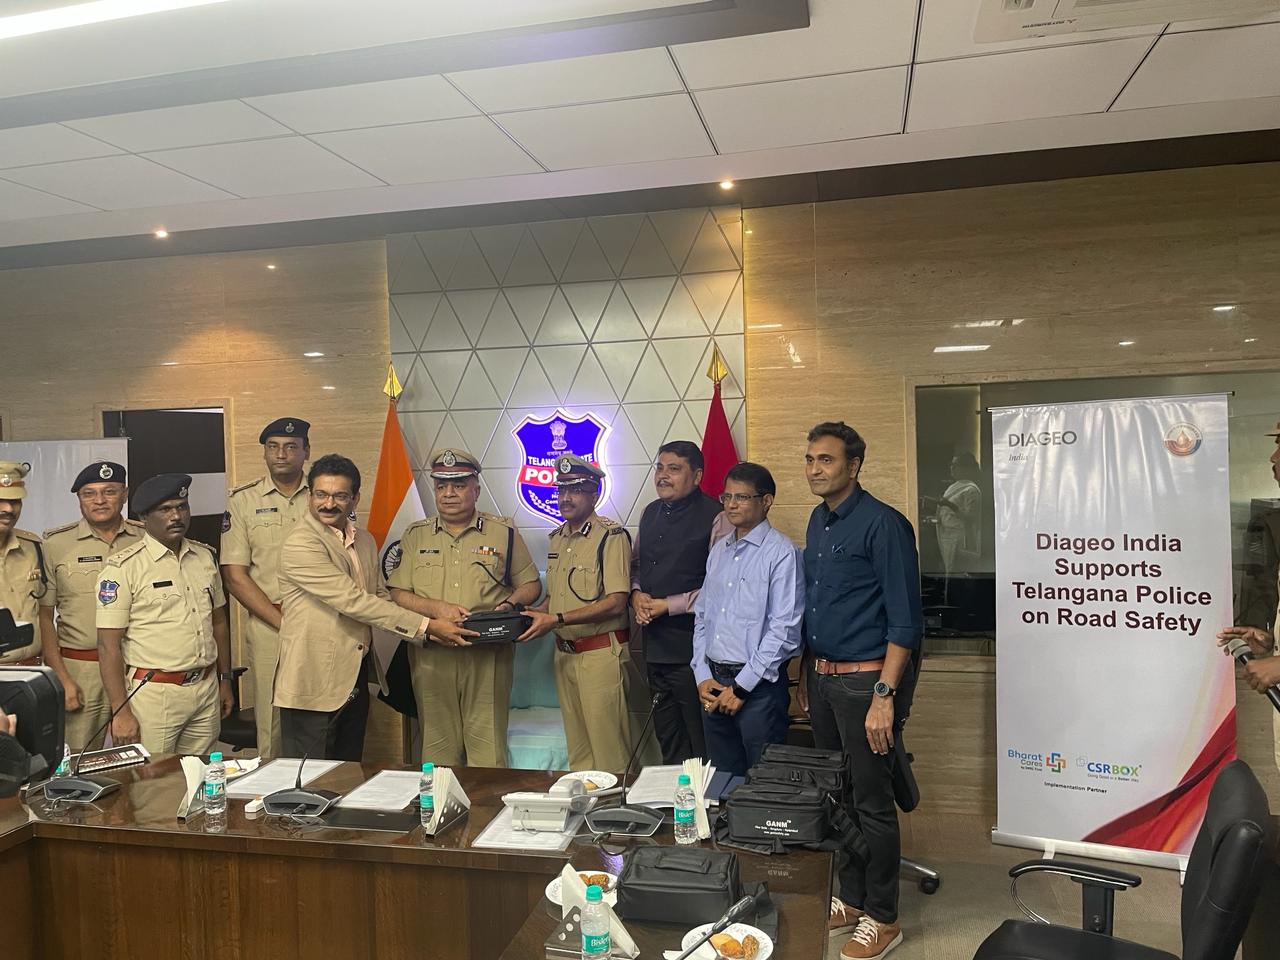 Diageo India supports Telangana Police efforts to curb drink driving through advanced Alcohol Breath Analysers